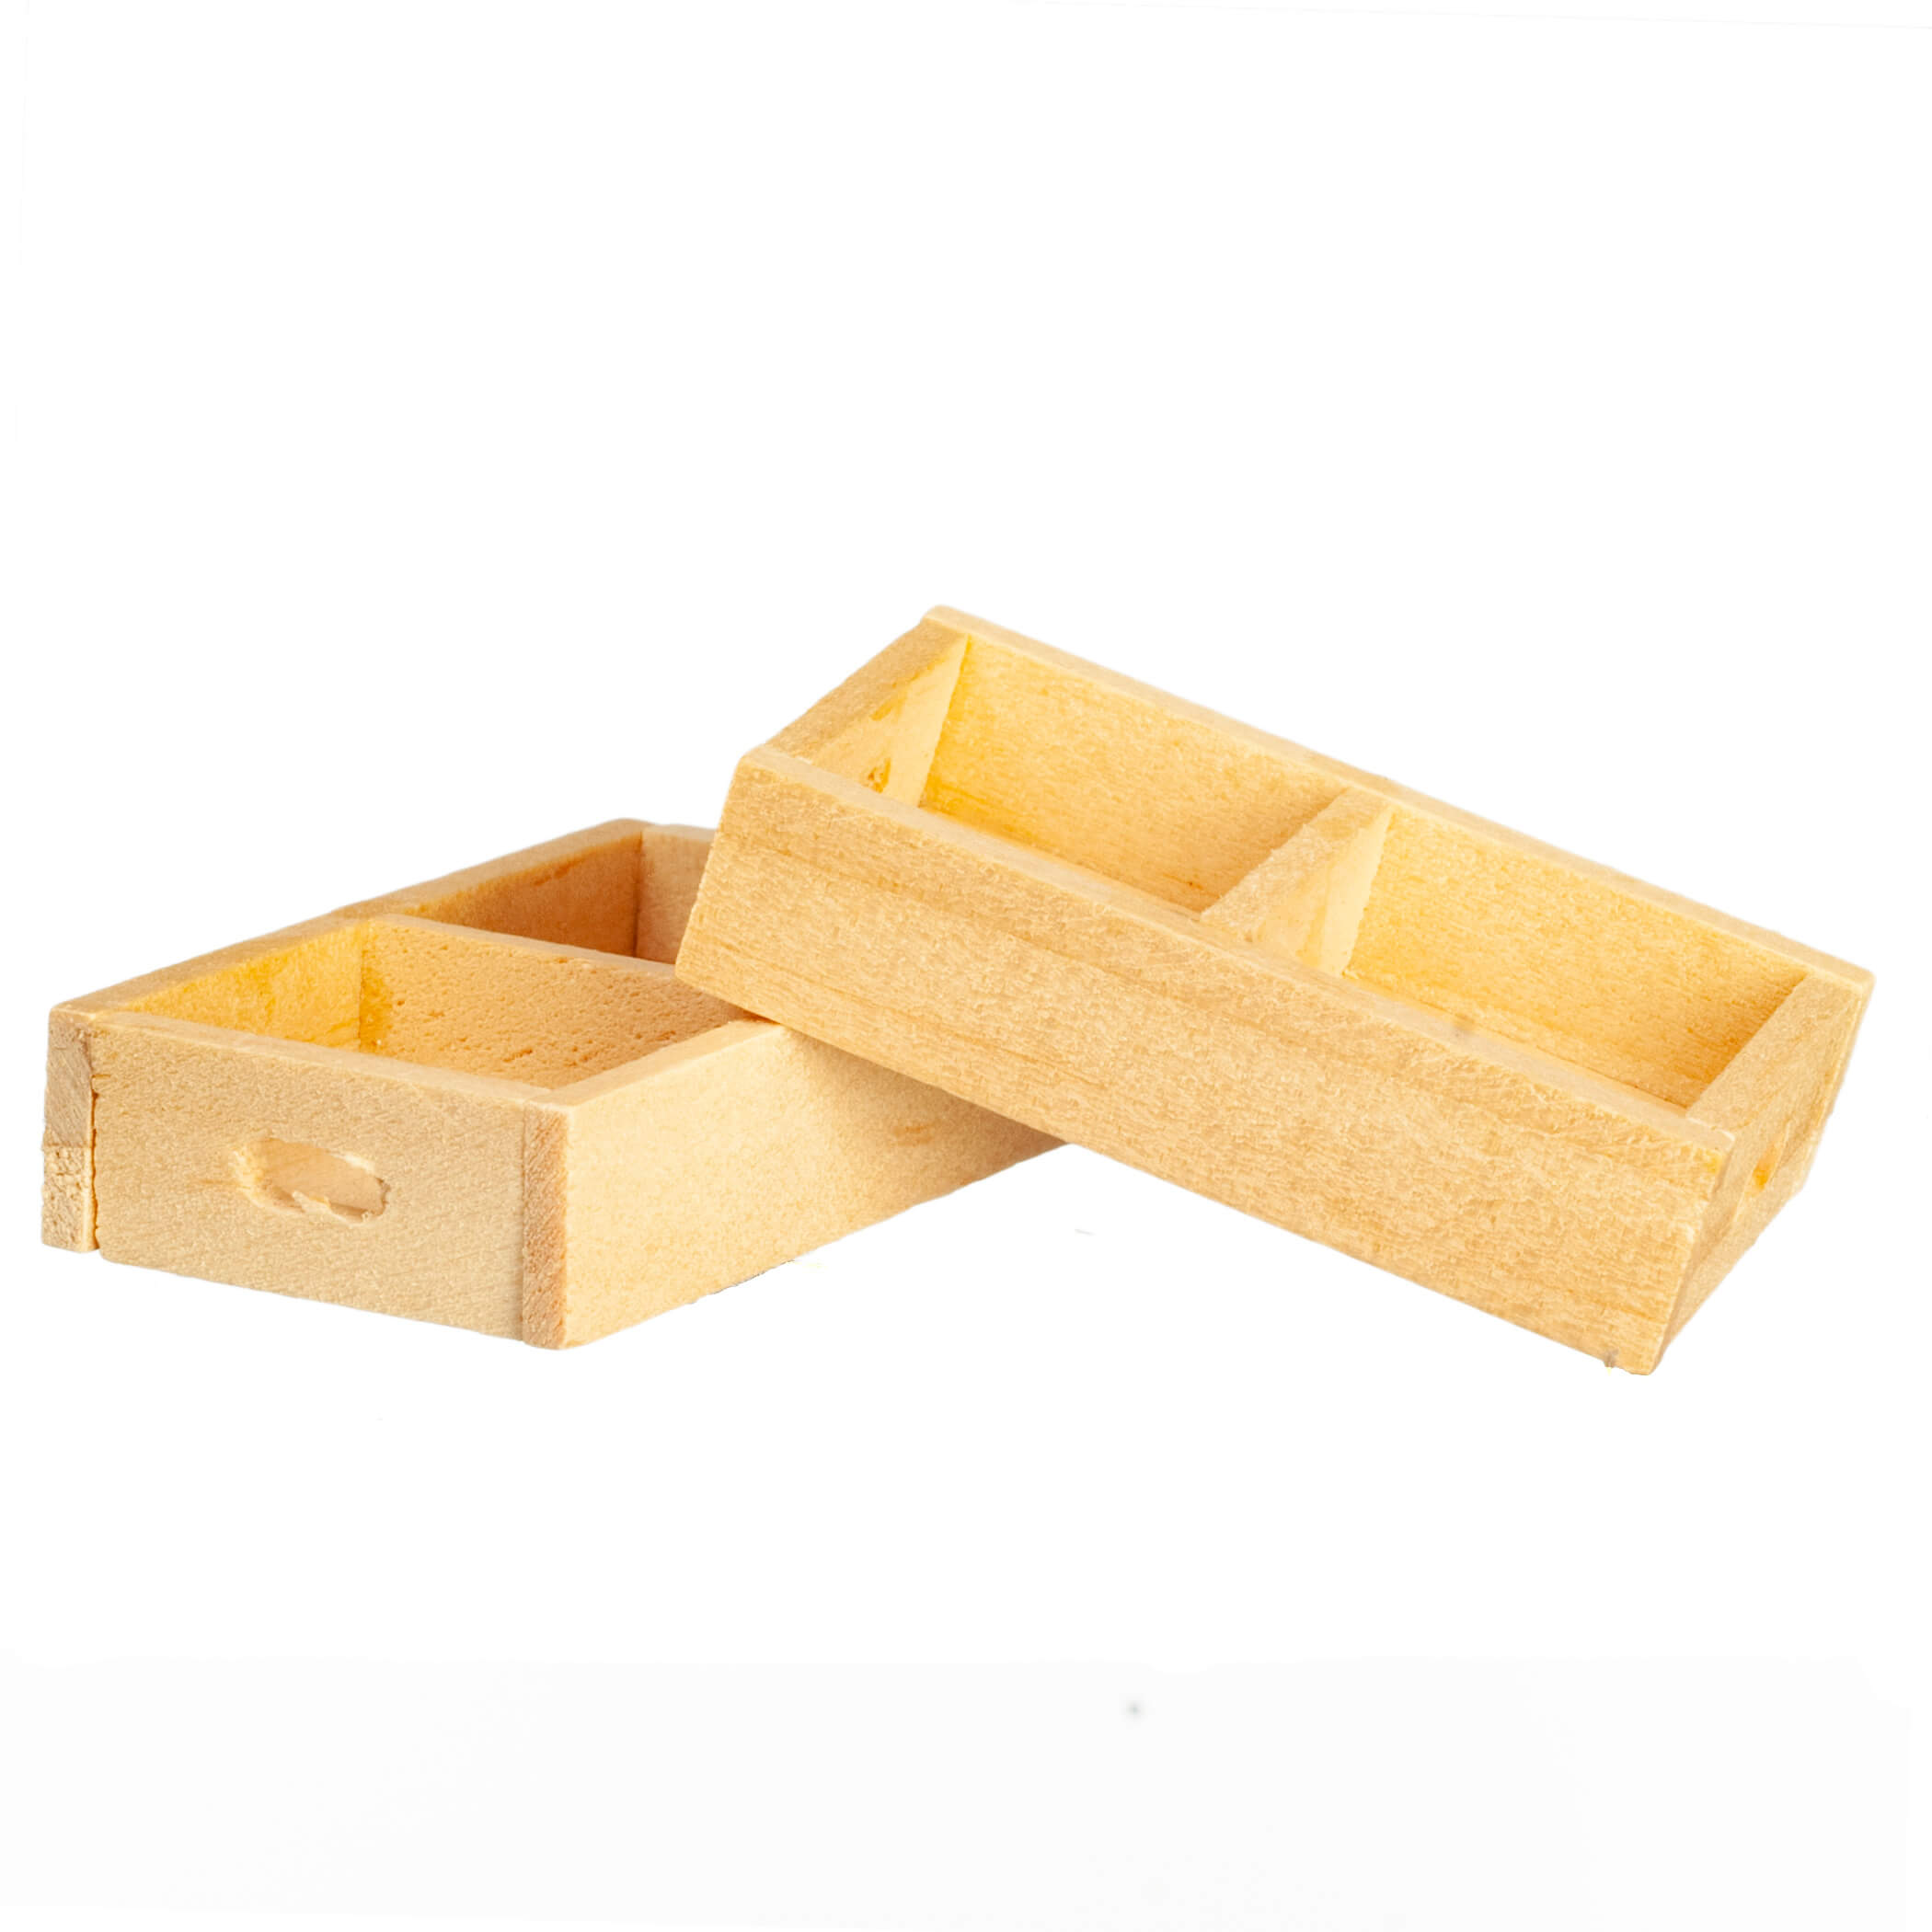 Shallow Wooden Box Crate 2pc - Natural